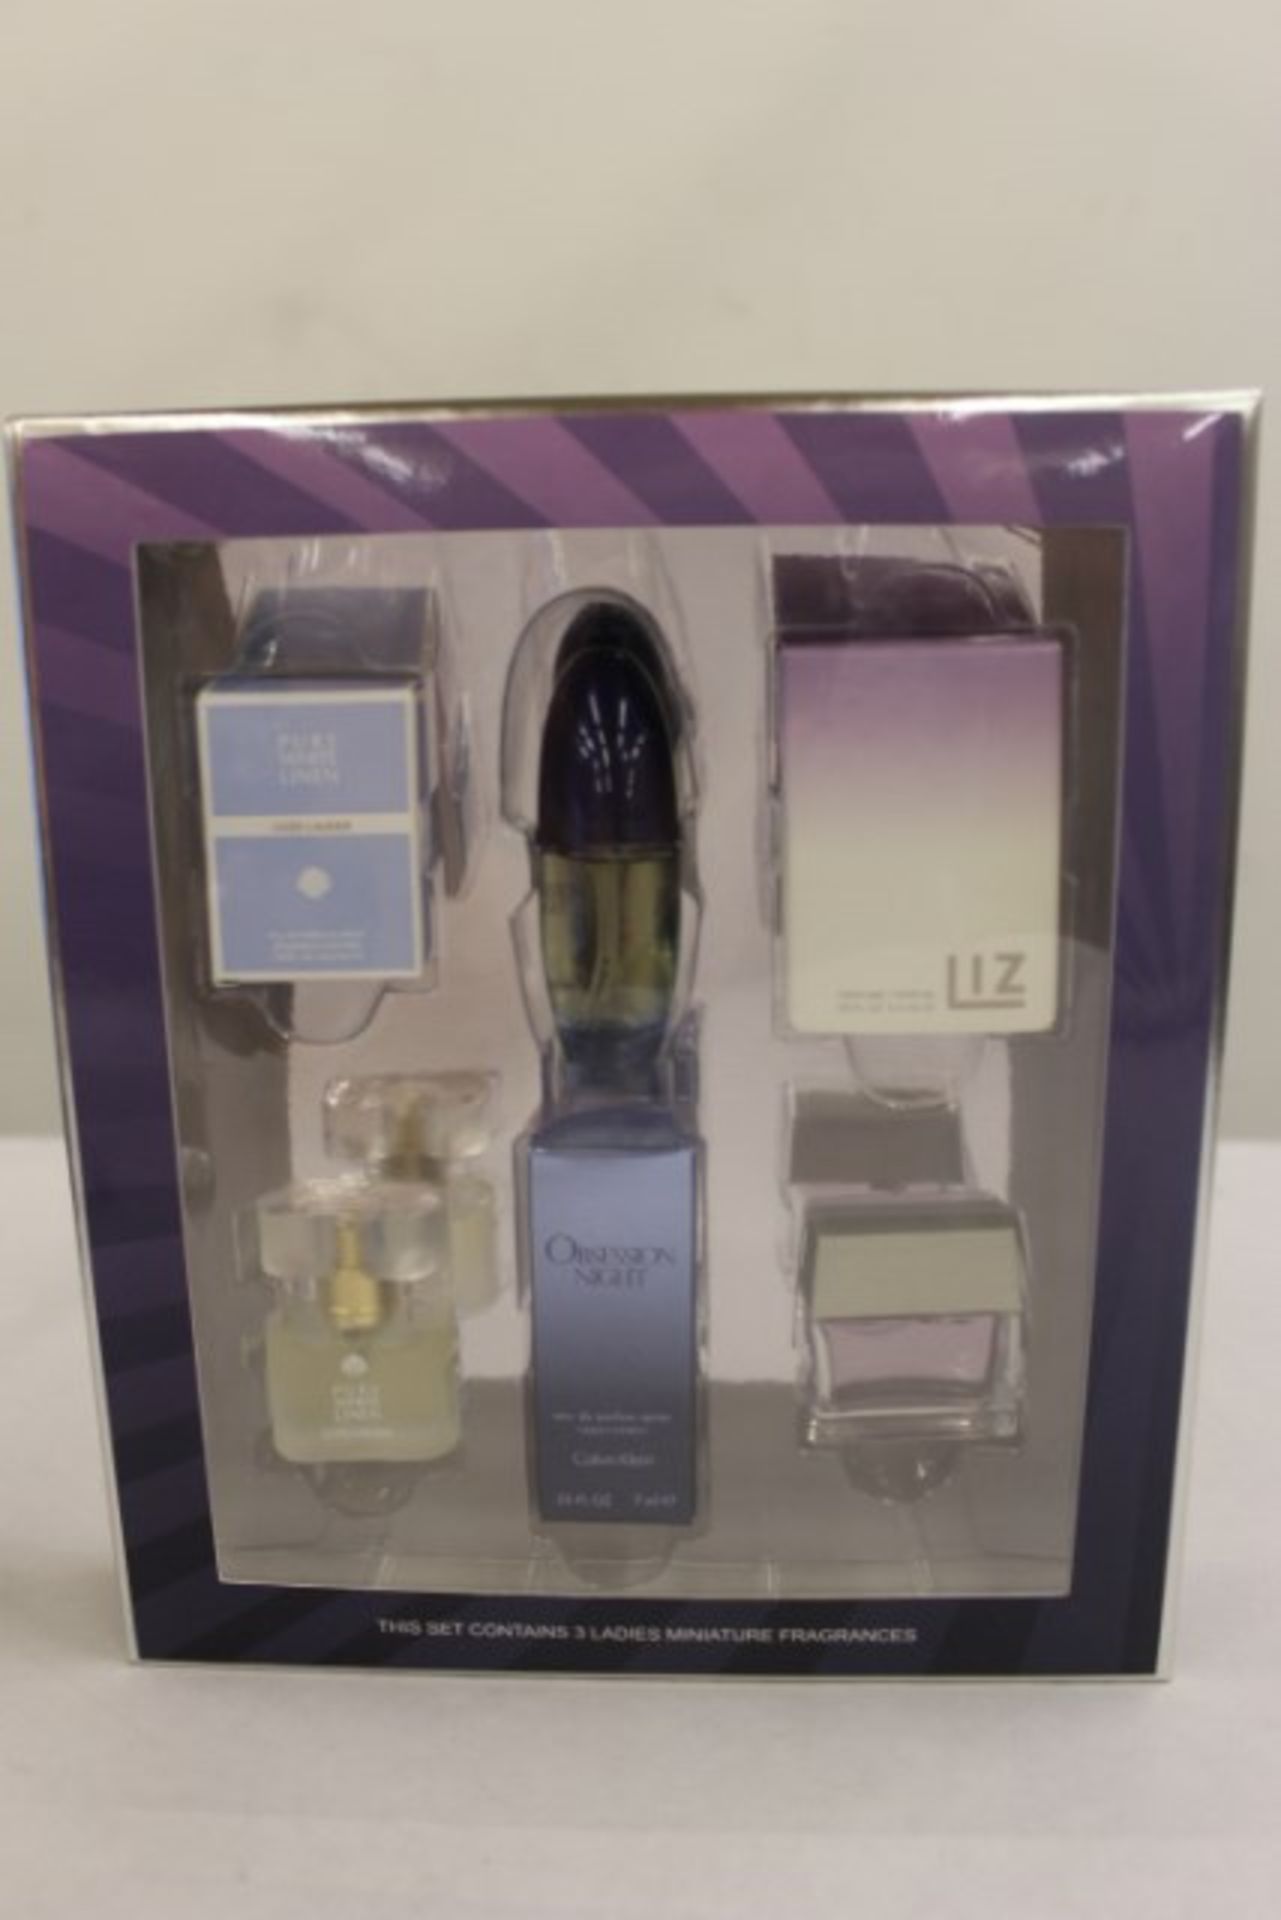 V Ladies Fragrance Collection including Pure White Linen, Obsession Night and Liz Claiborne